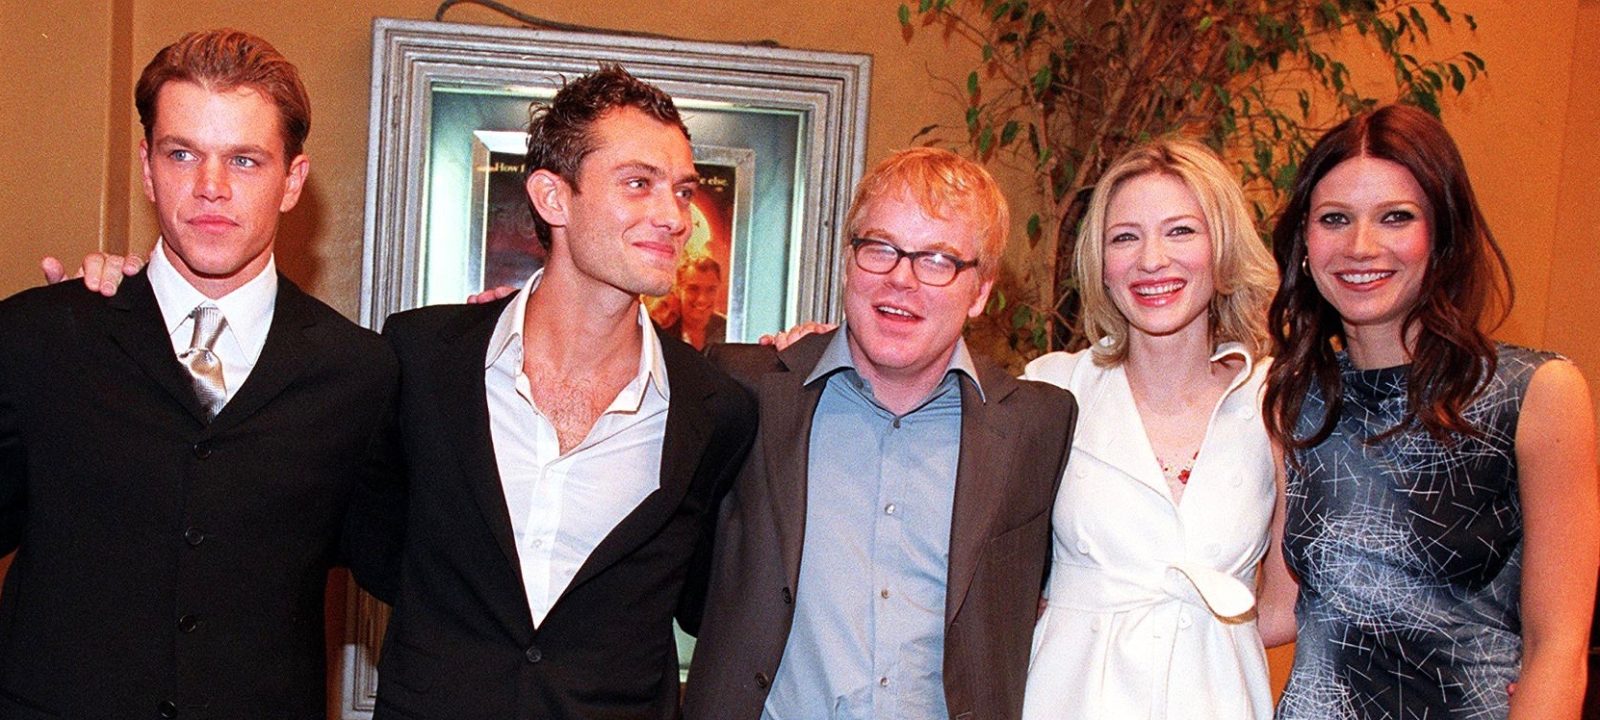 The cast of "The Talented Mr. Ripley" pose at the